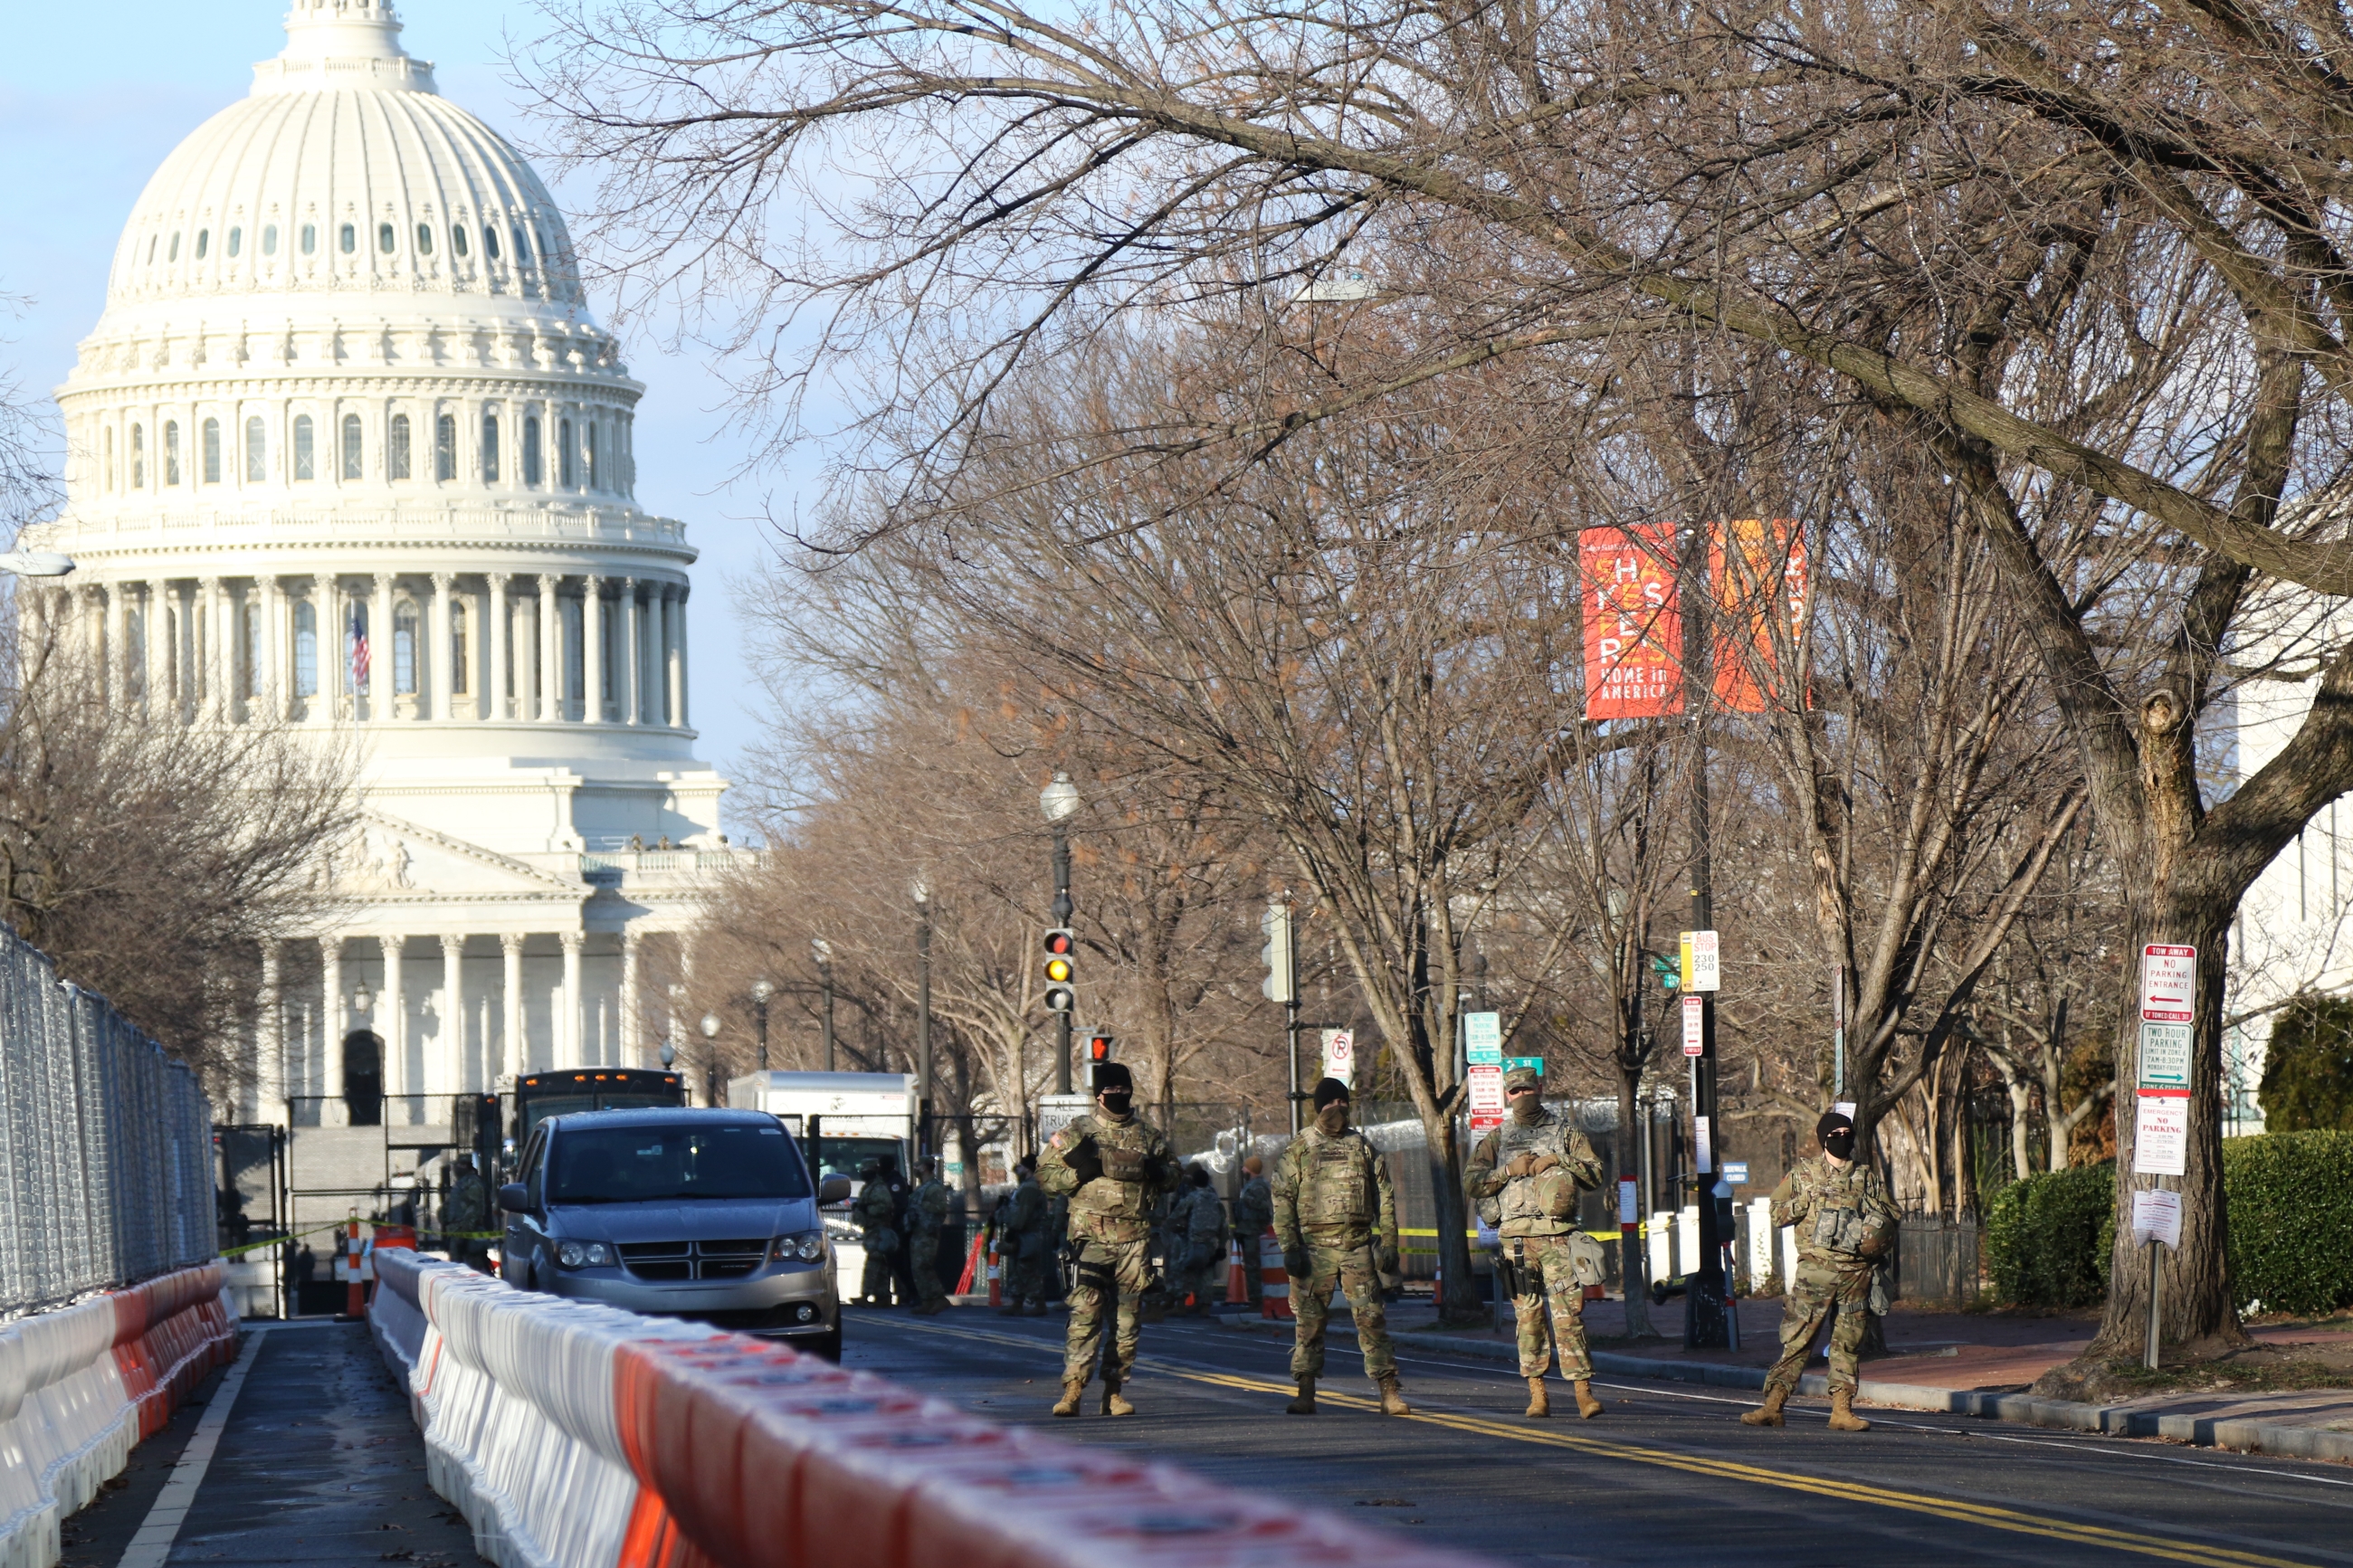 National Guard members are stationed several hundred feet from the US Capitol building.